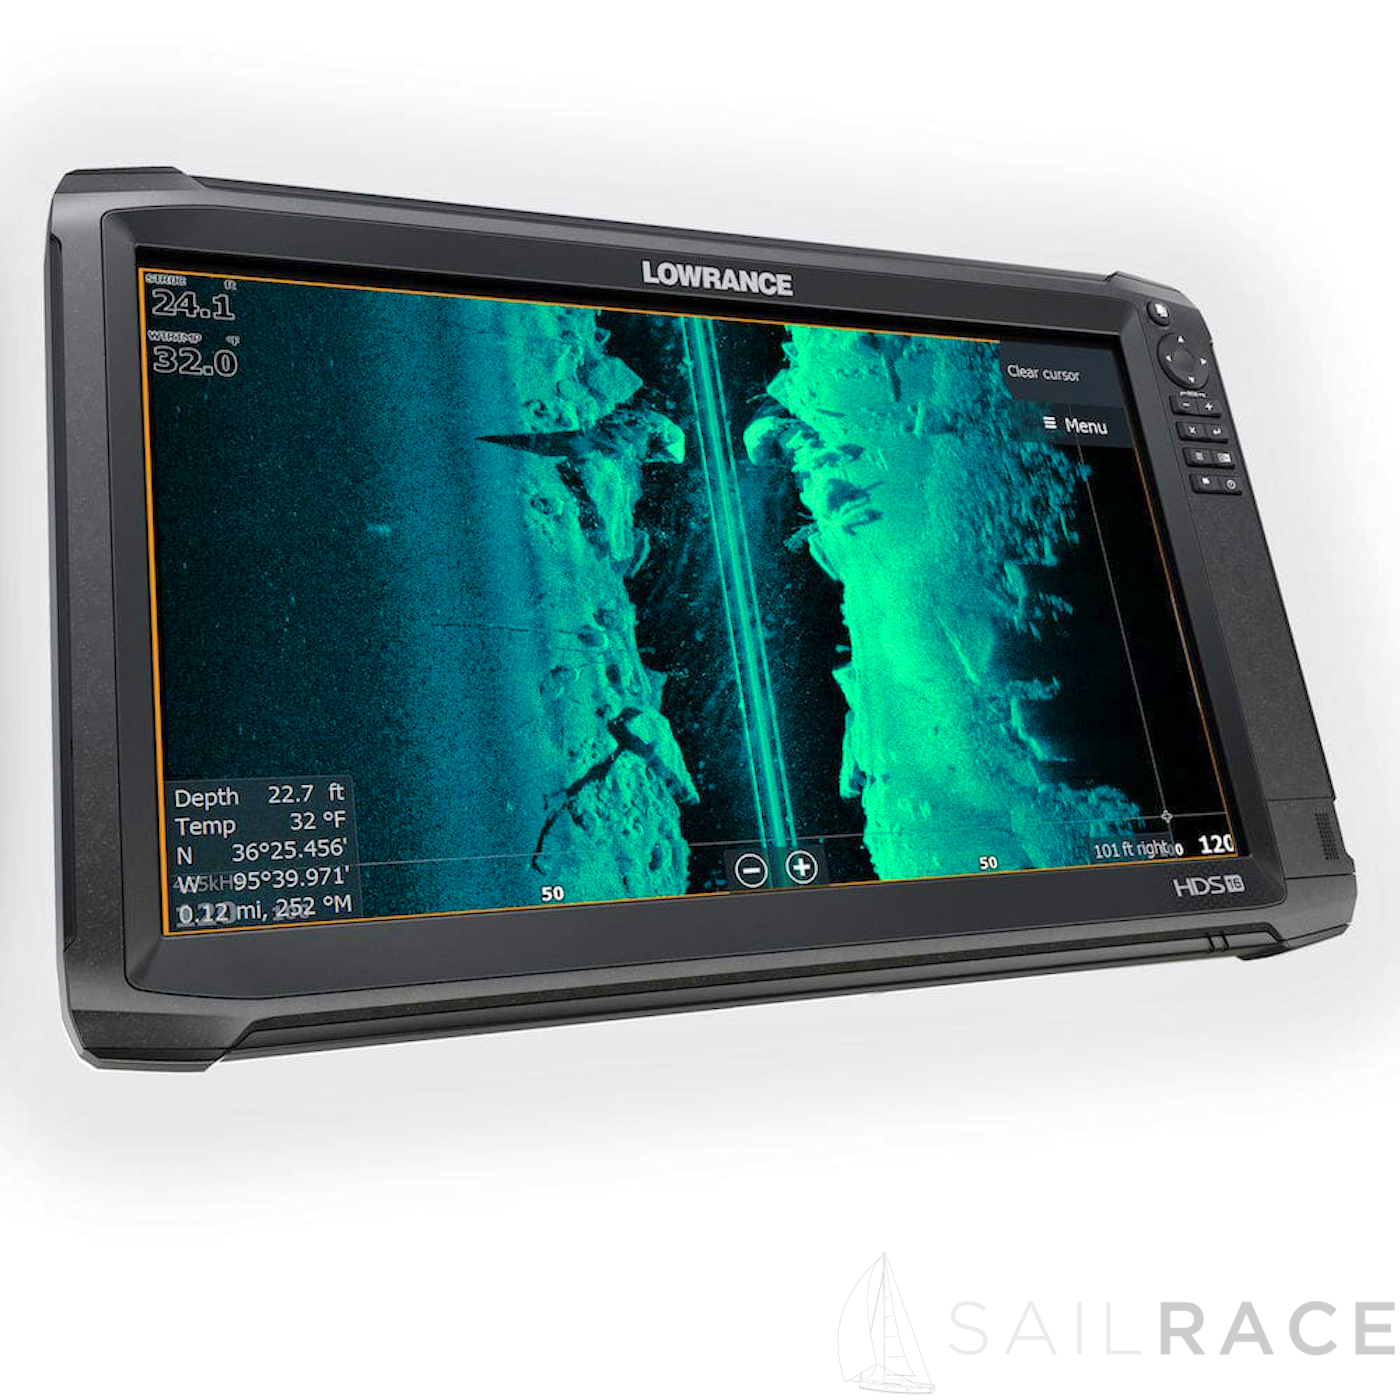 Lowrance HDS-16 Carbon ROW con trasduttore TotalScan™ Skimmer Transducer - immagine 3